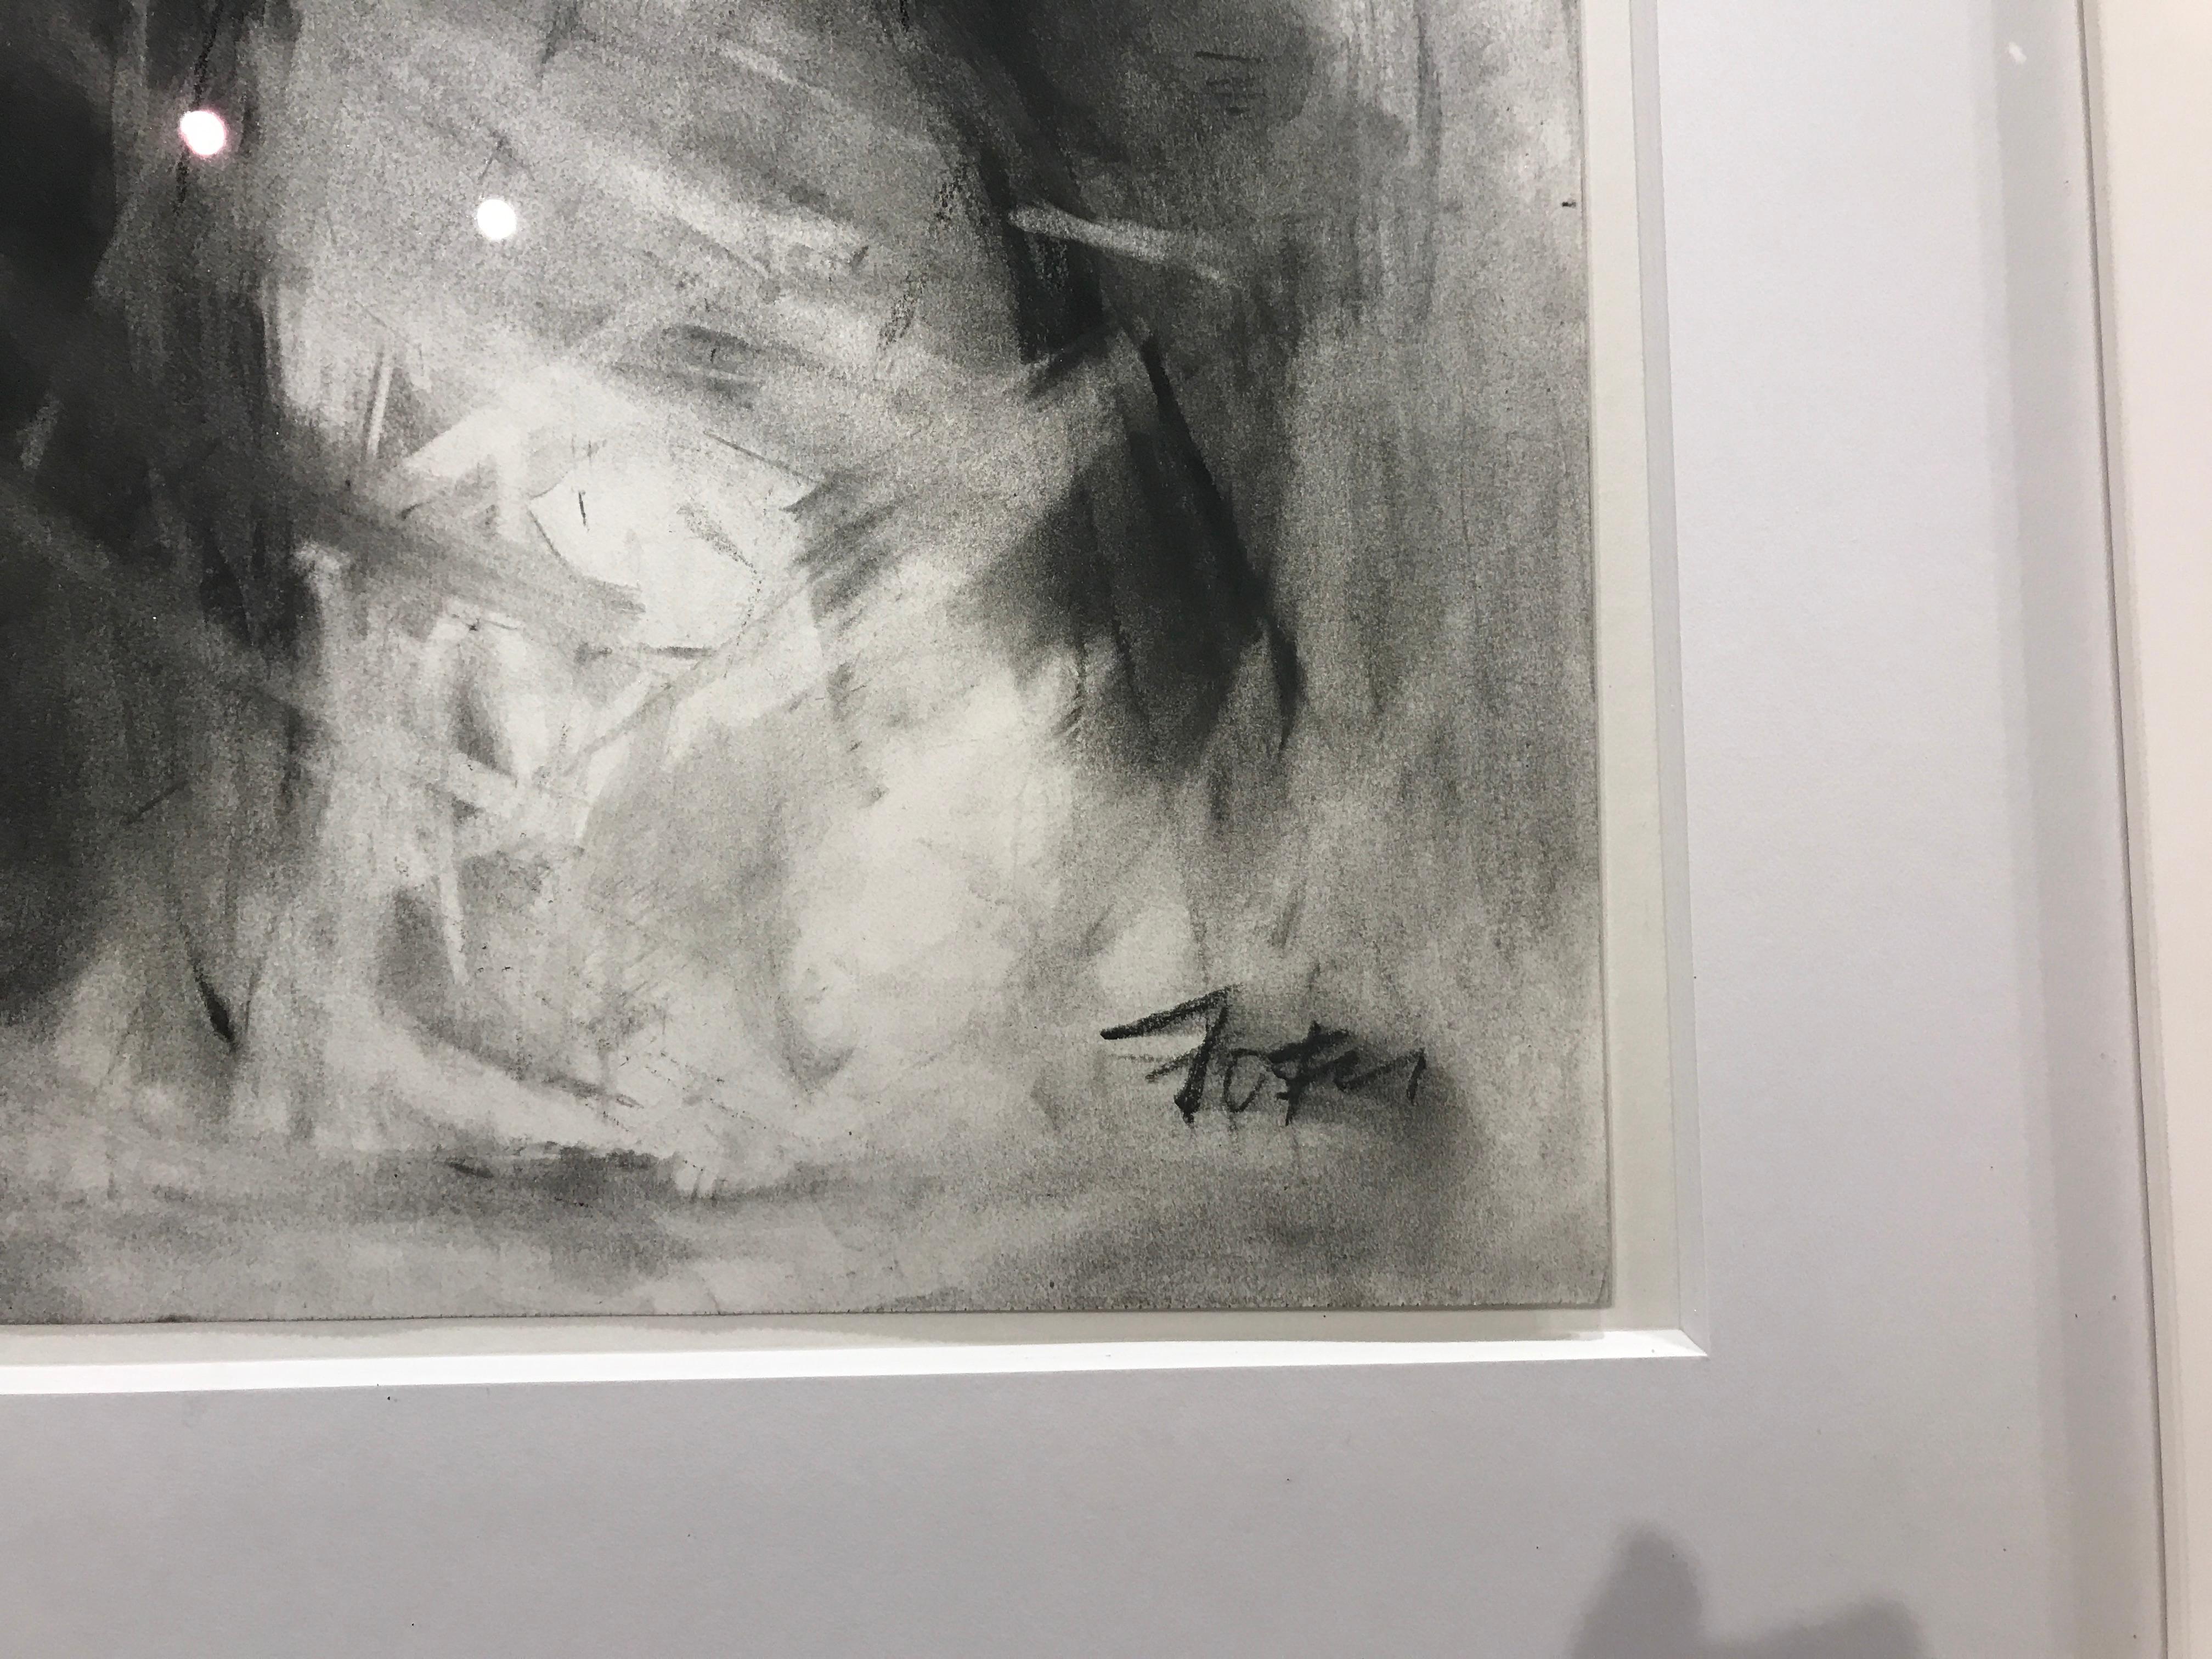 MJ II by Gail Foster 2018 Petite Framed Charcoal on Paper Figurative 4